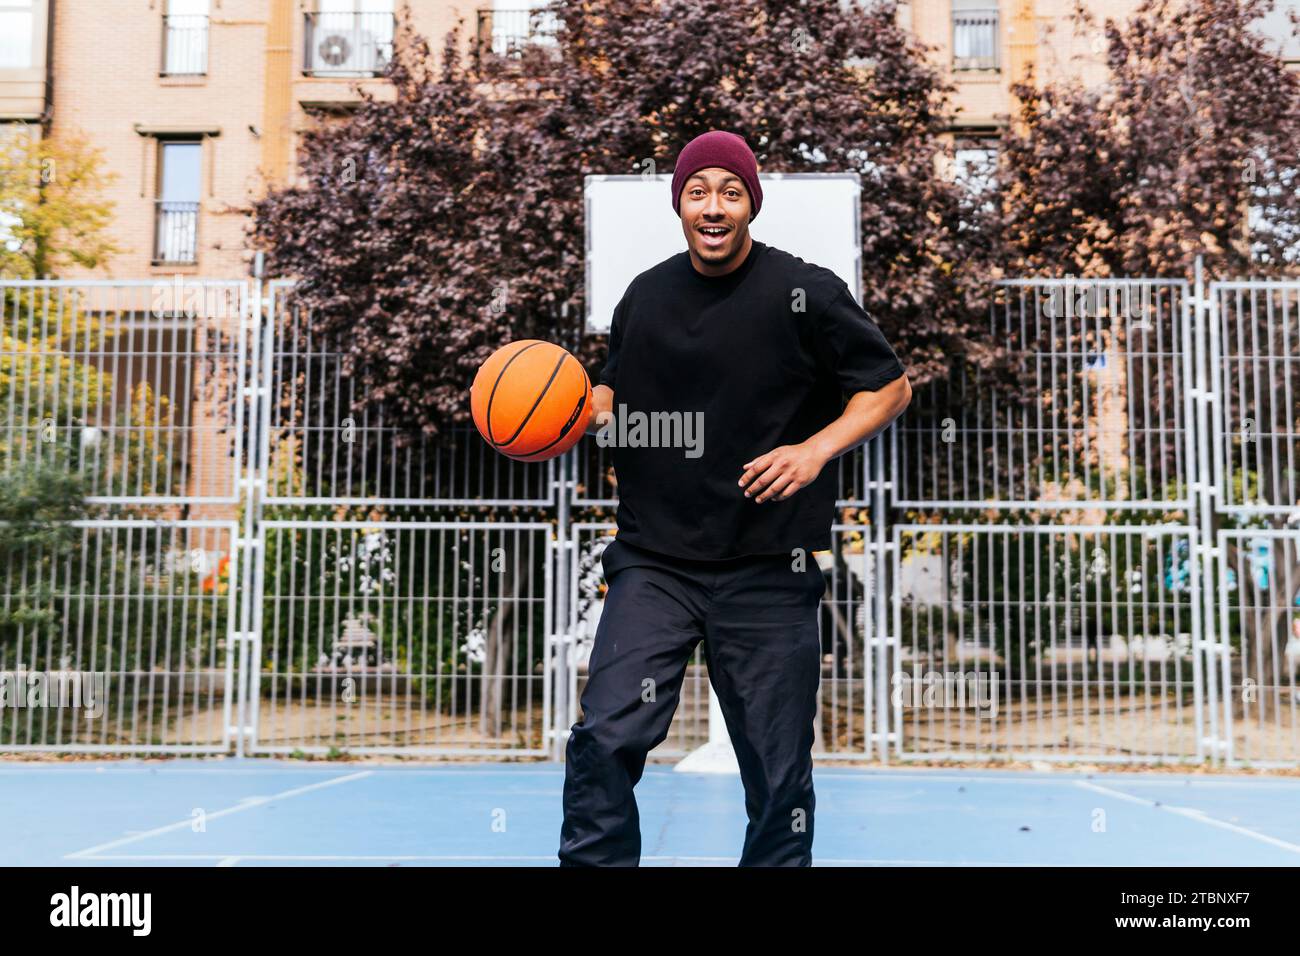 multiracial man playing with basketball on court Stock Photo